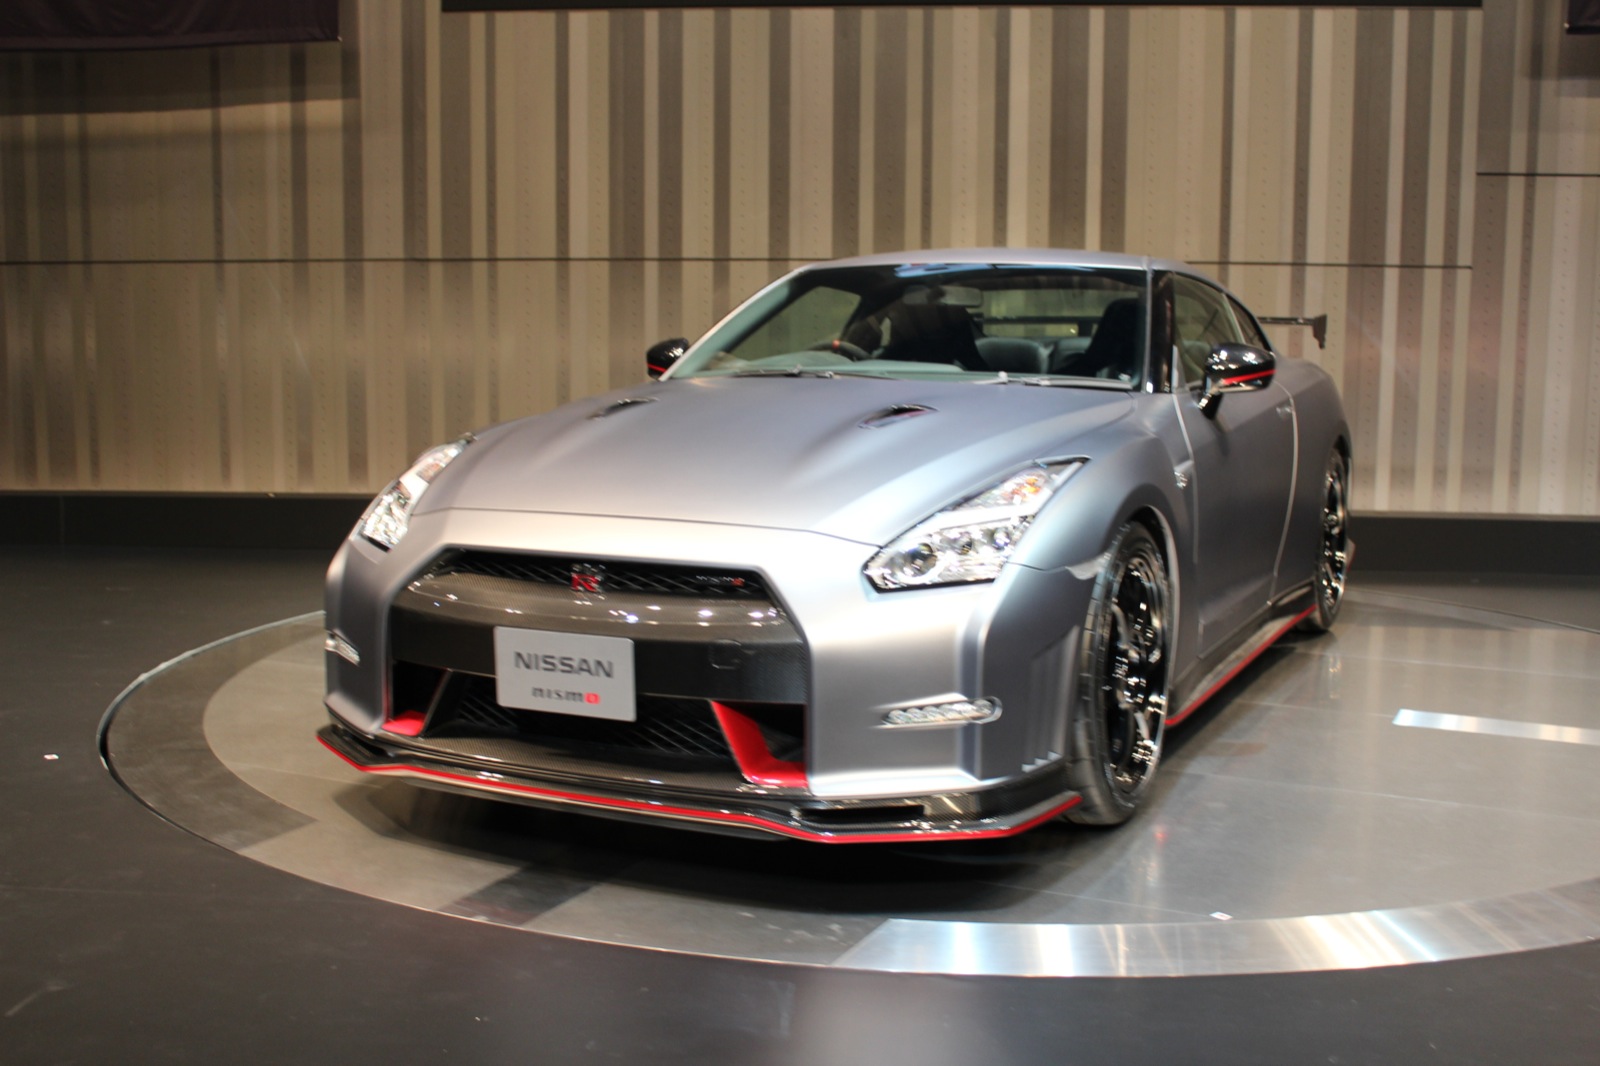 2015-nissan-gt-r-nismo--tokyo-motor-show-preview-event-nissan-global-headquarters_100446460_h